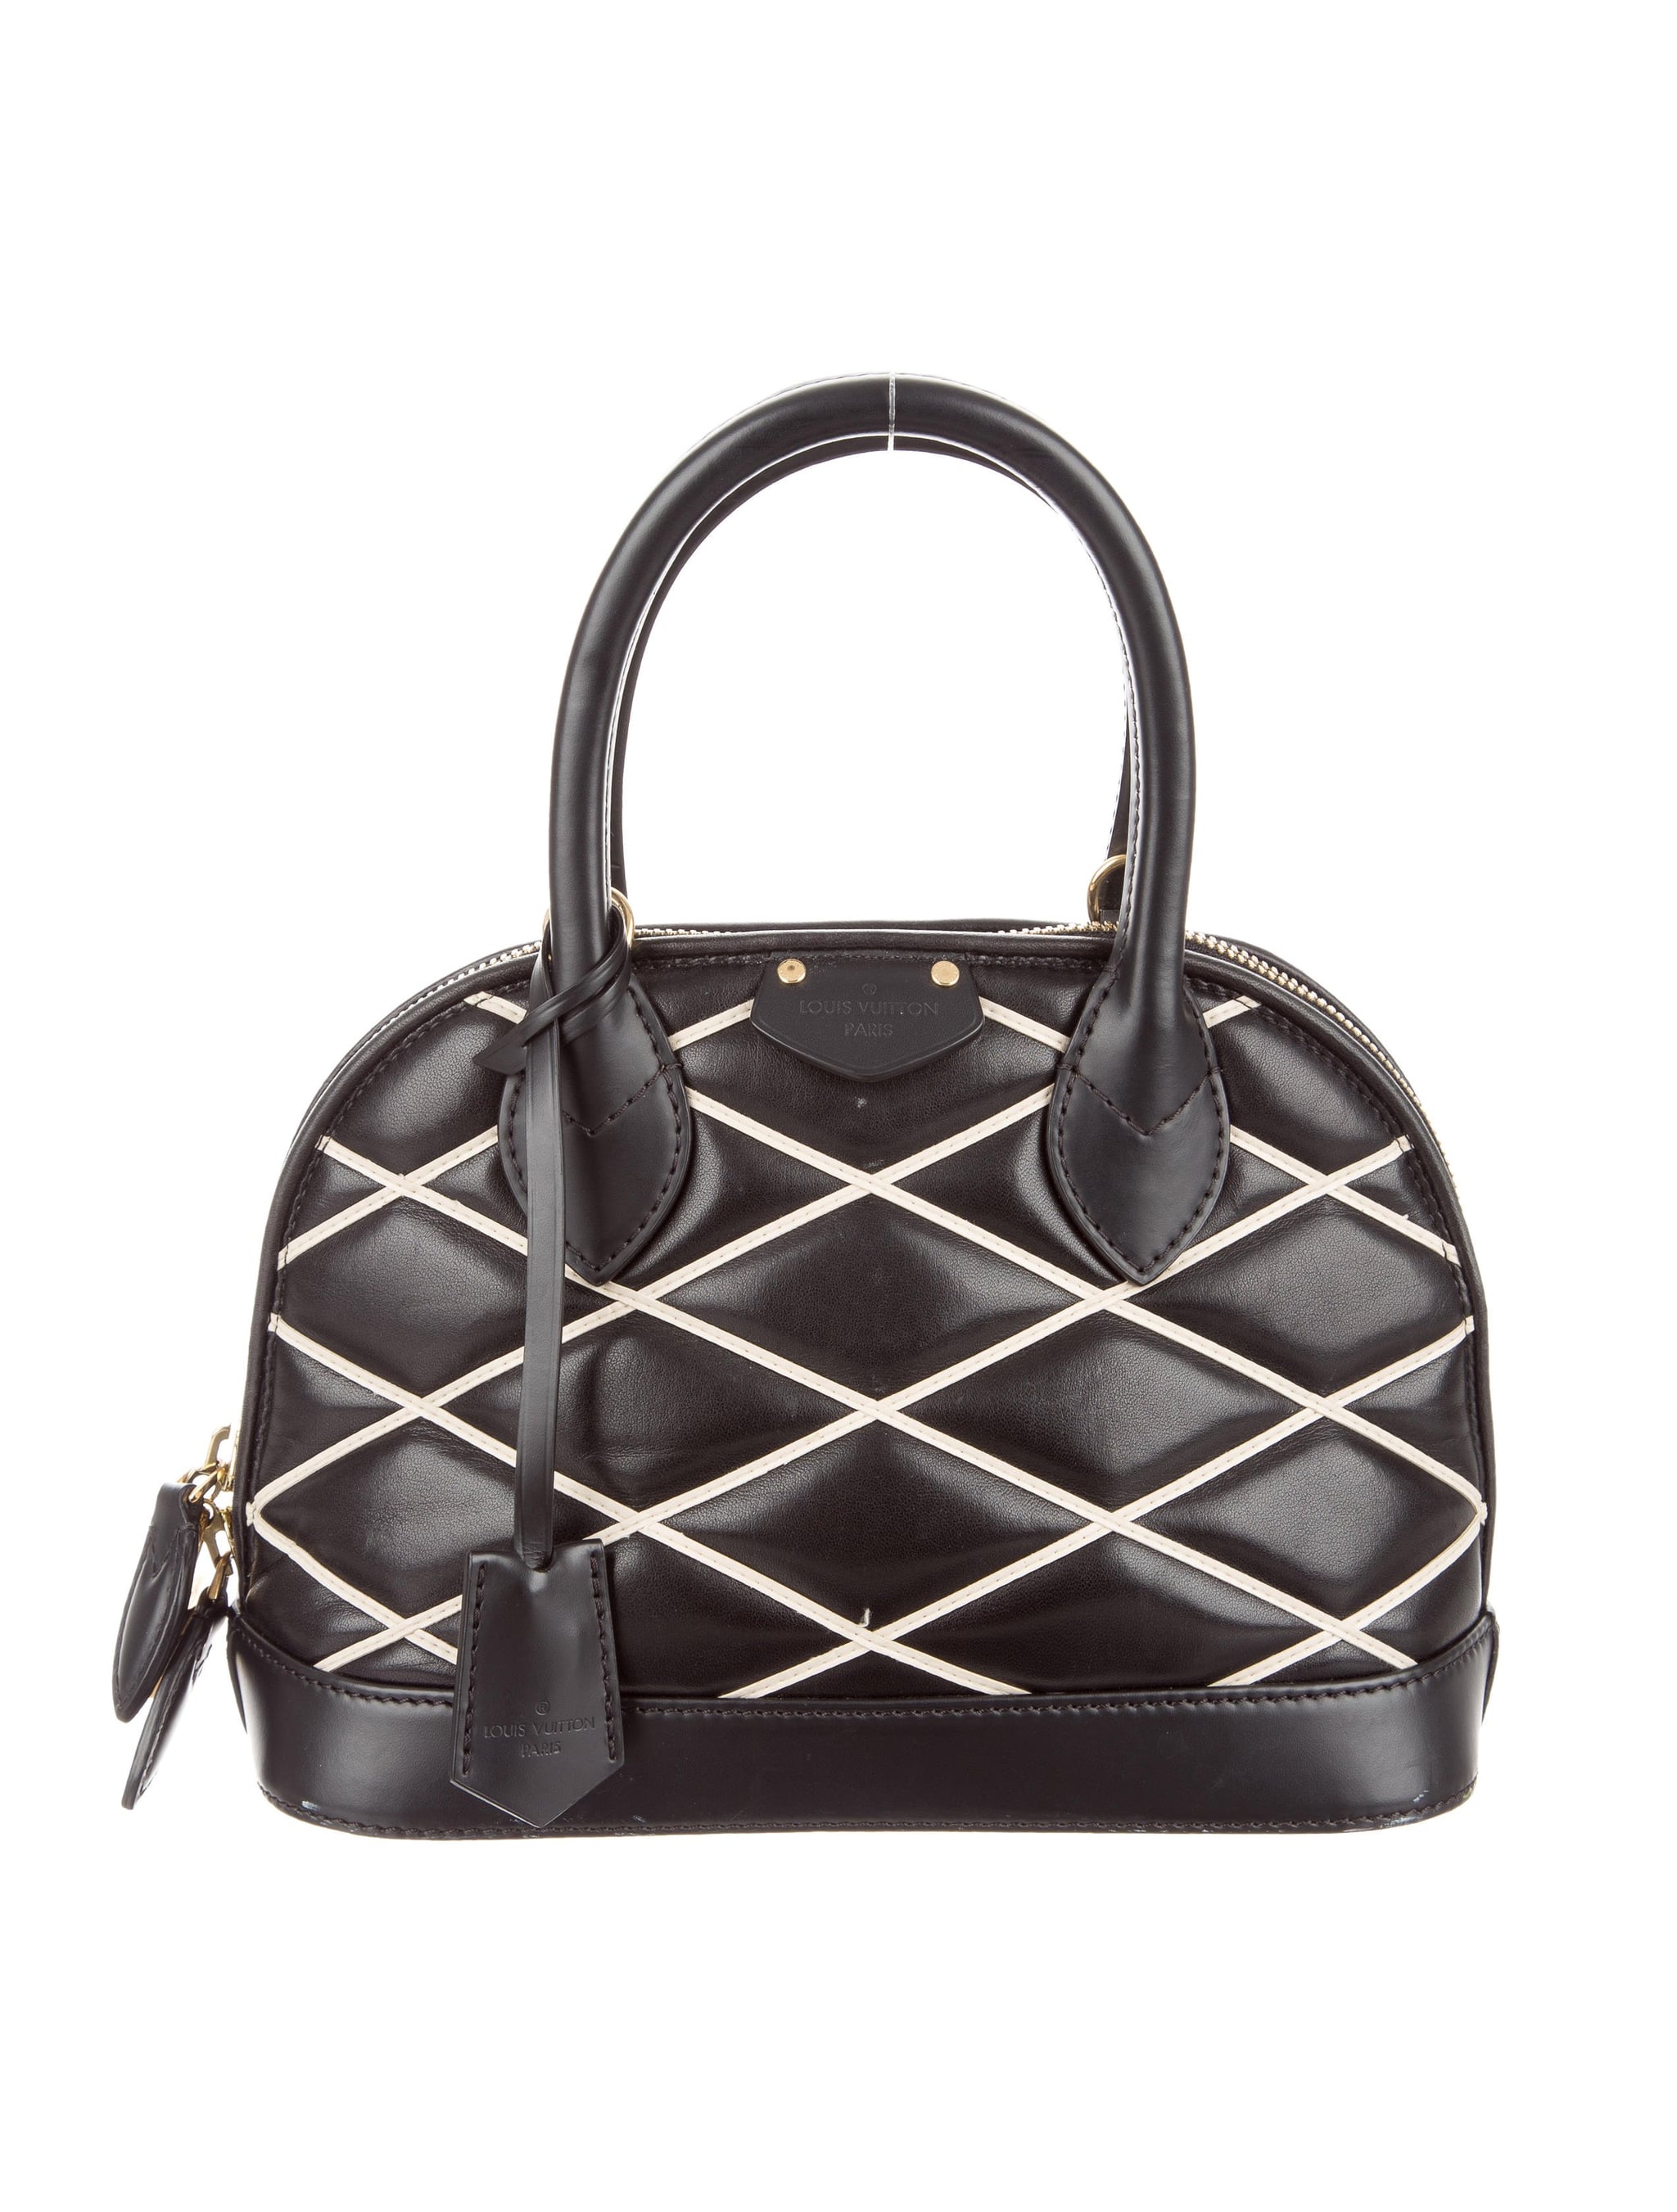 Louis Vuitton Malletage Alma BB Bag, Meet the Only Royal Queen With More  Designer Bags Than Kate Middleton